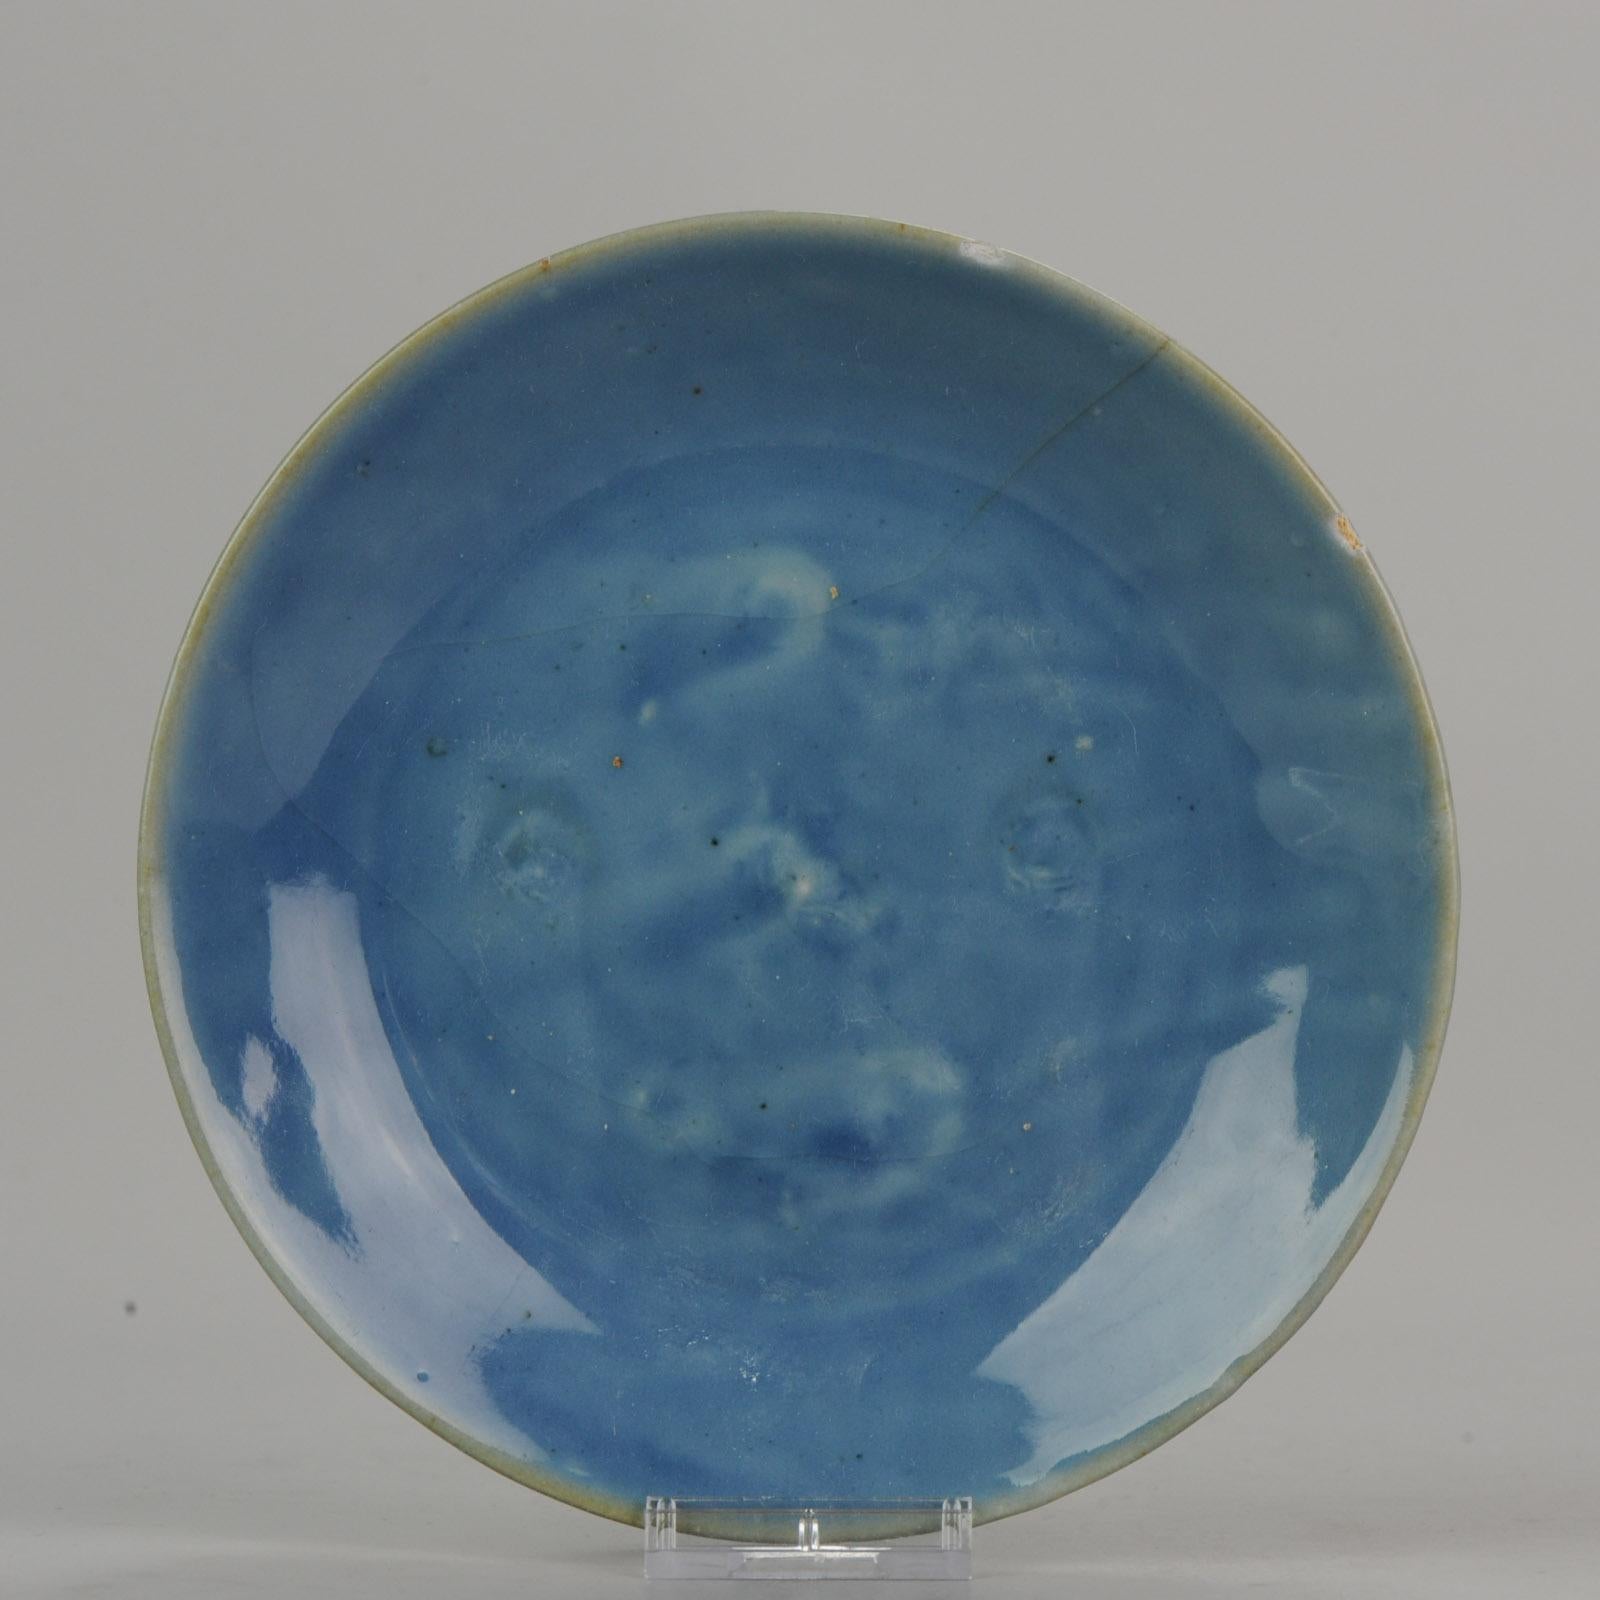 Description
A very beautiful plate, rare monochrome blue ground. Great study material.

Condition
Overall condition; 2 large crackle line in central plate, 1 running out in a hairline. 1 more crackle line from base rim. also 2 small chips. Size: